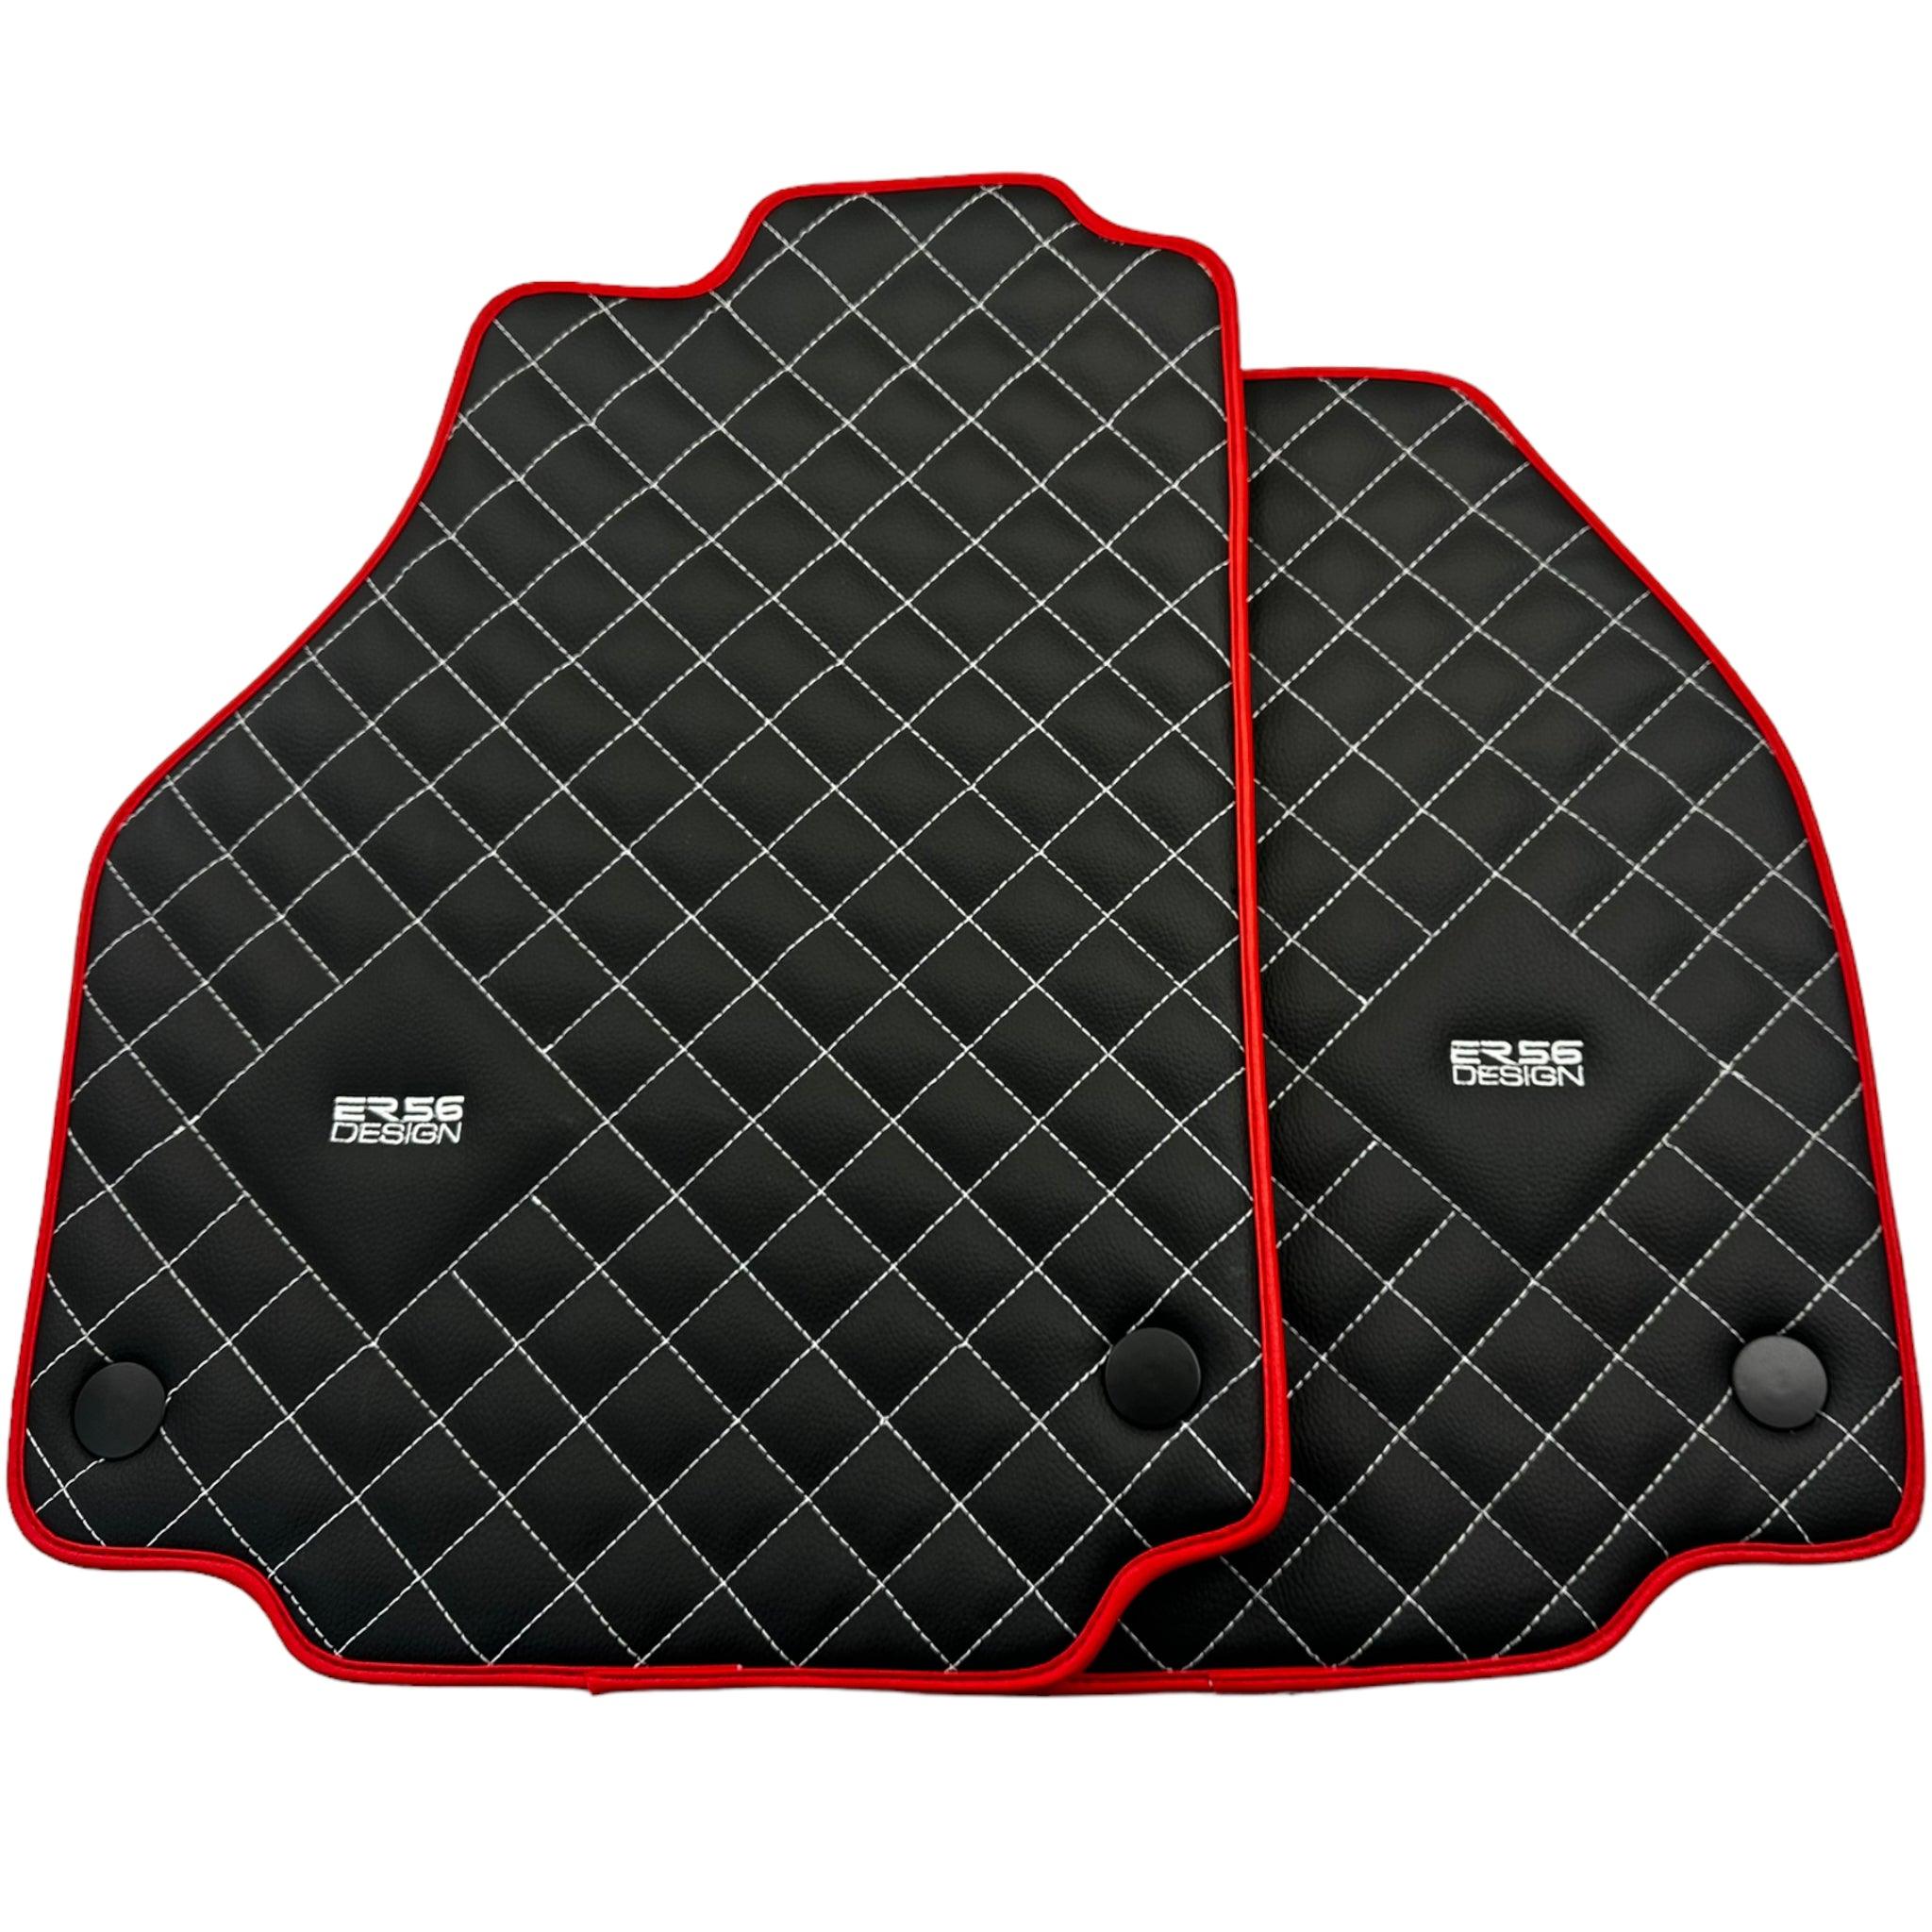 Leather Floor Mats for Ferrari 458 GT2 with White Sewing and Red Trim | ER56 Design